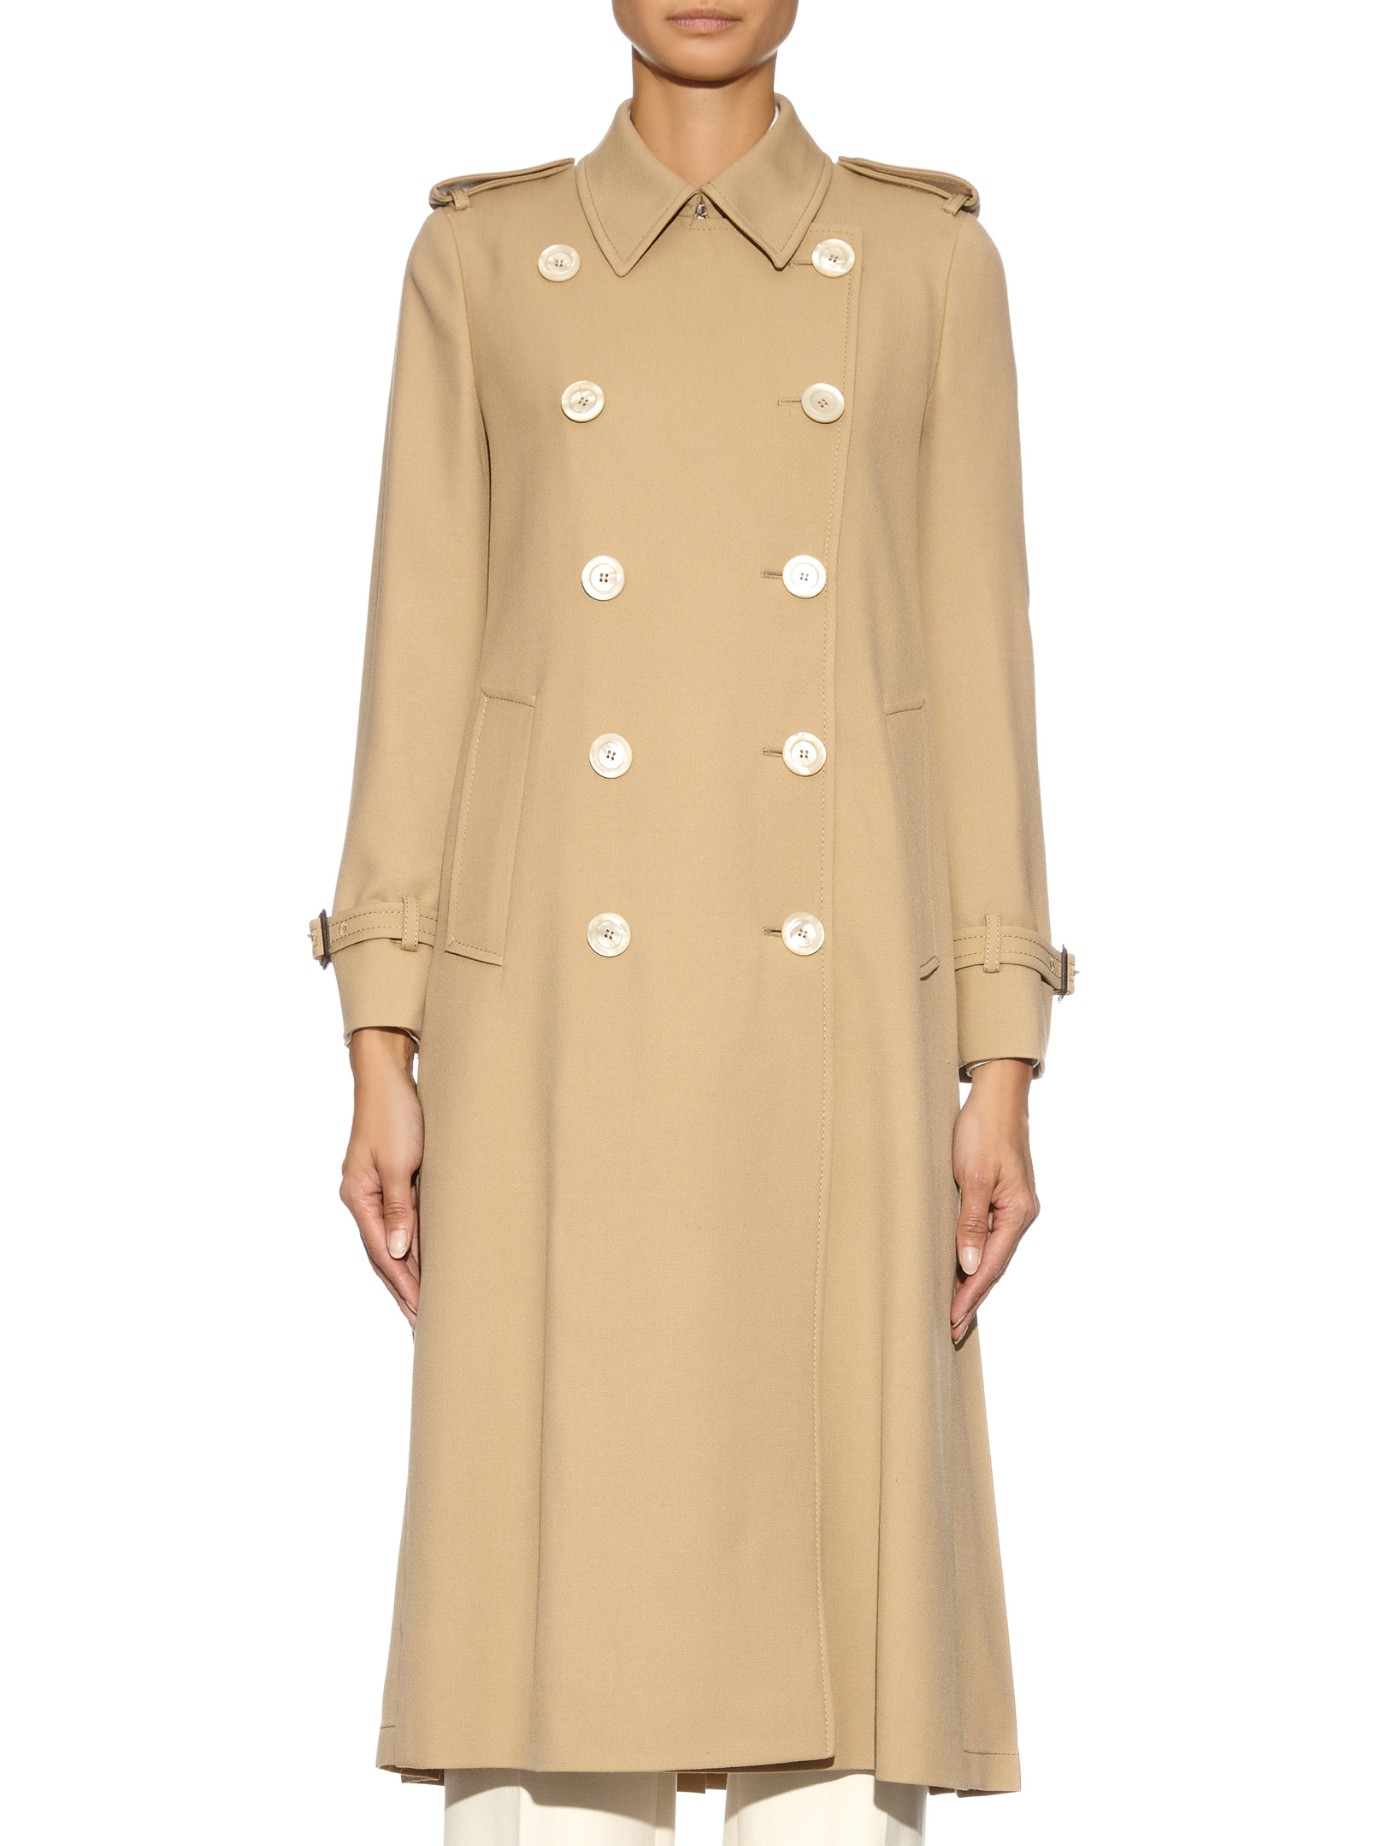 Gucci Pleated Back Wool Trench Coat in Beige (Natural) - Lyst